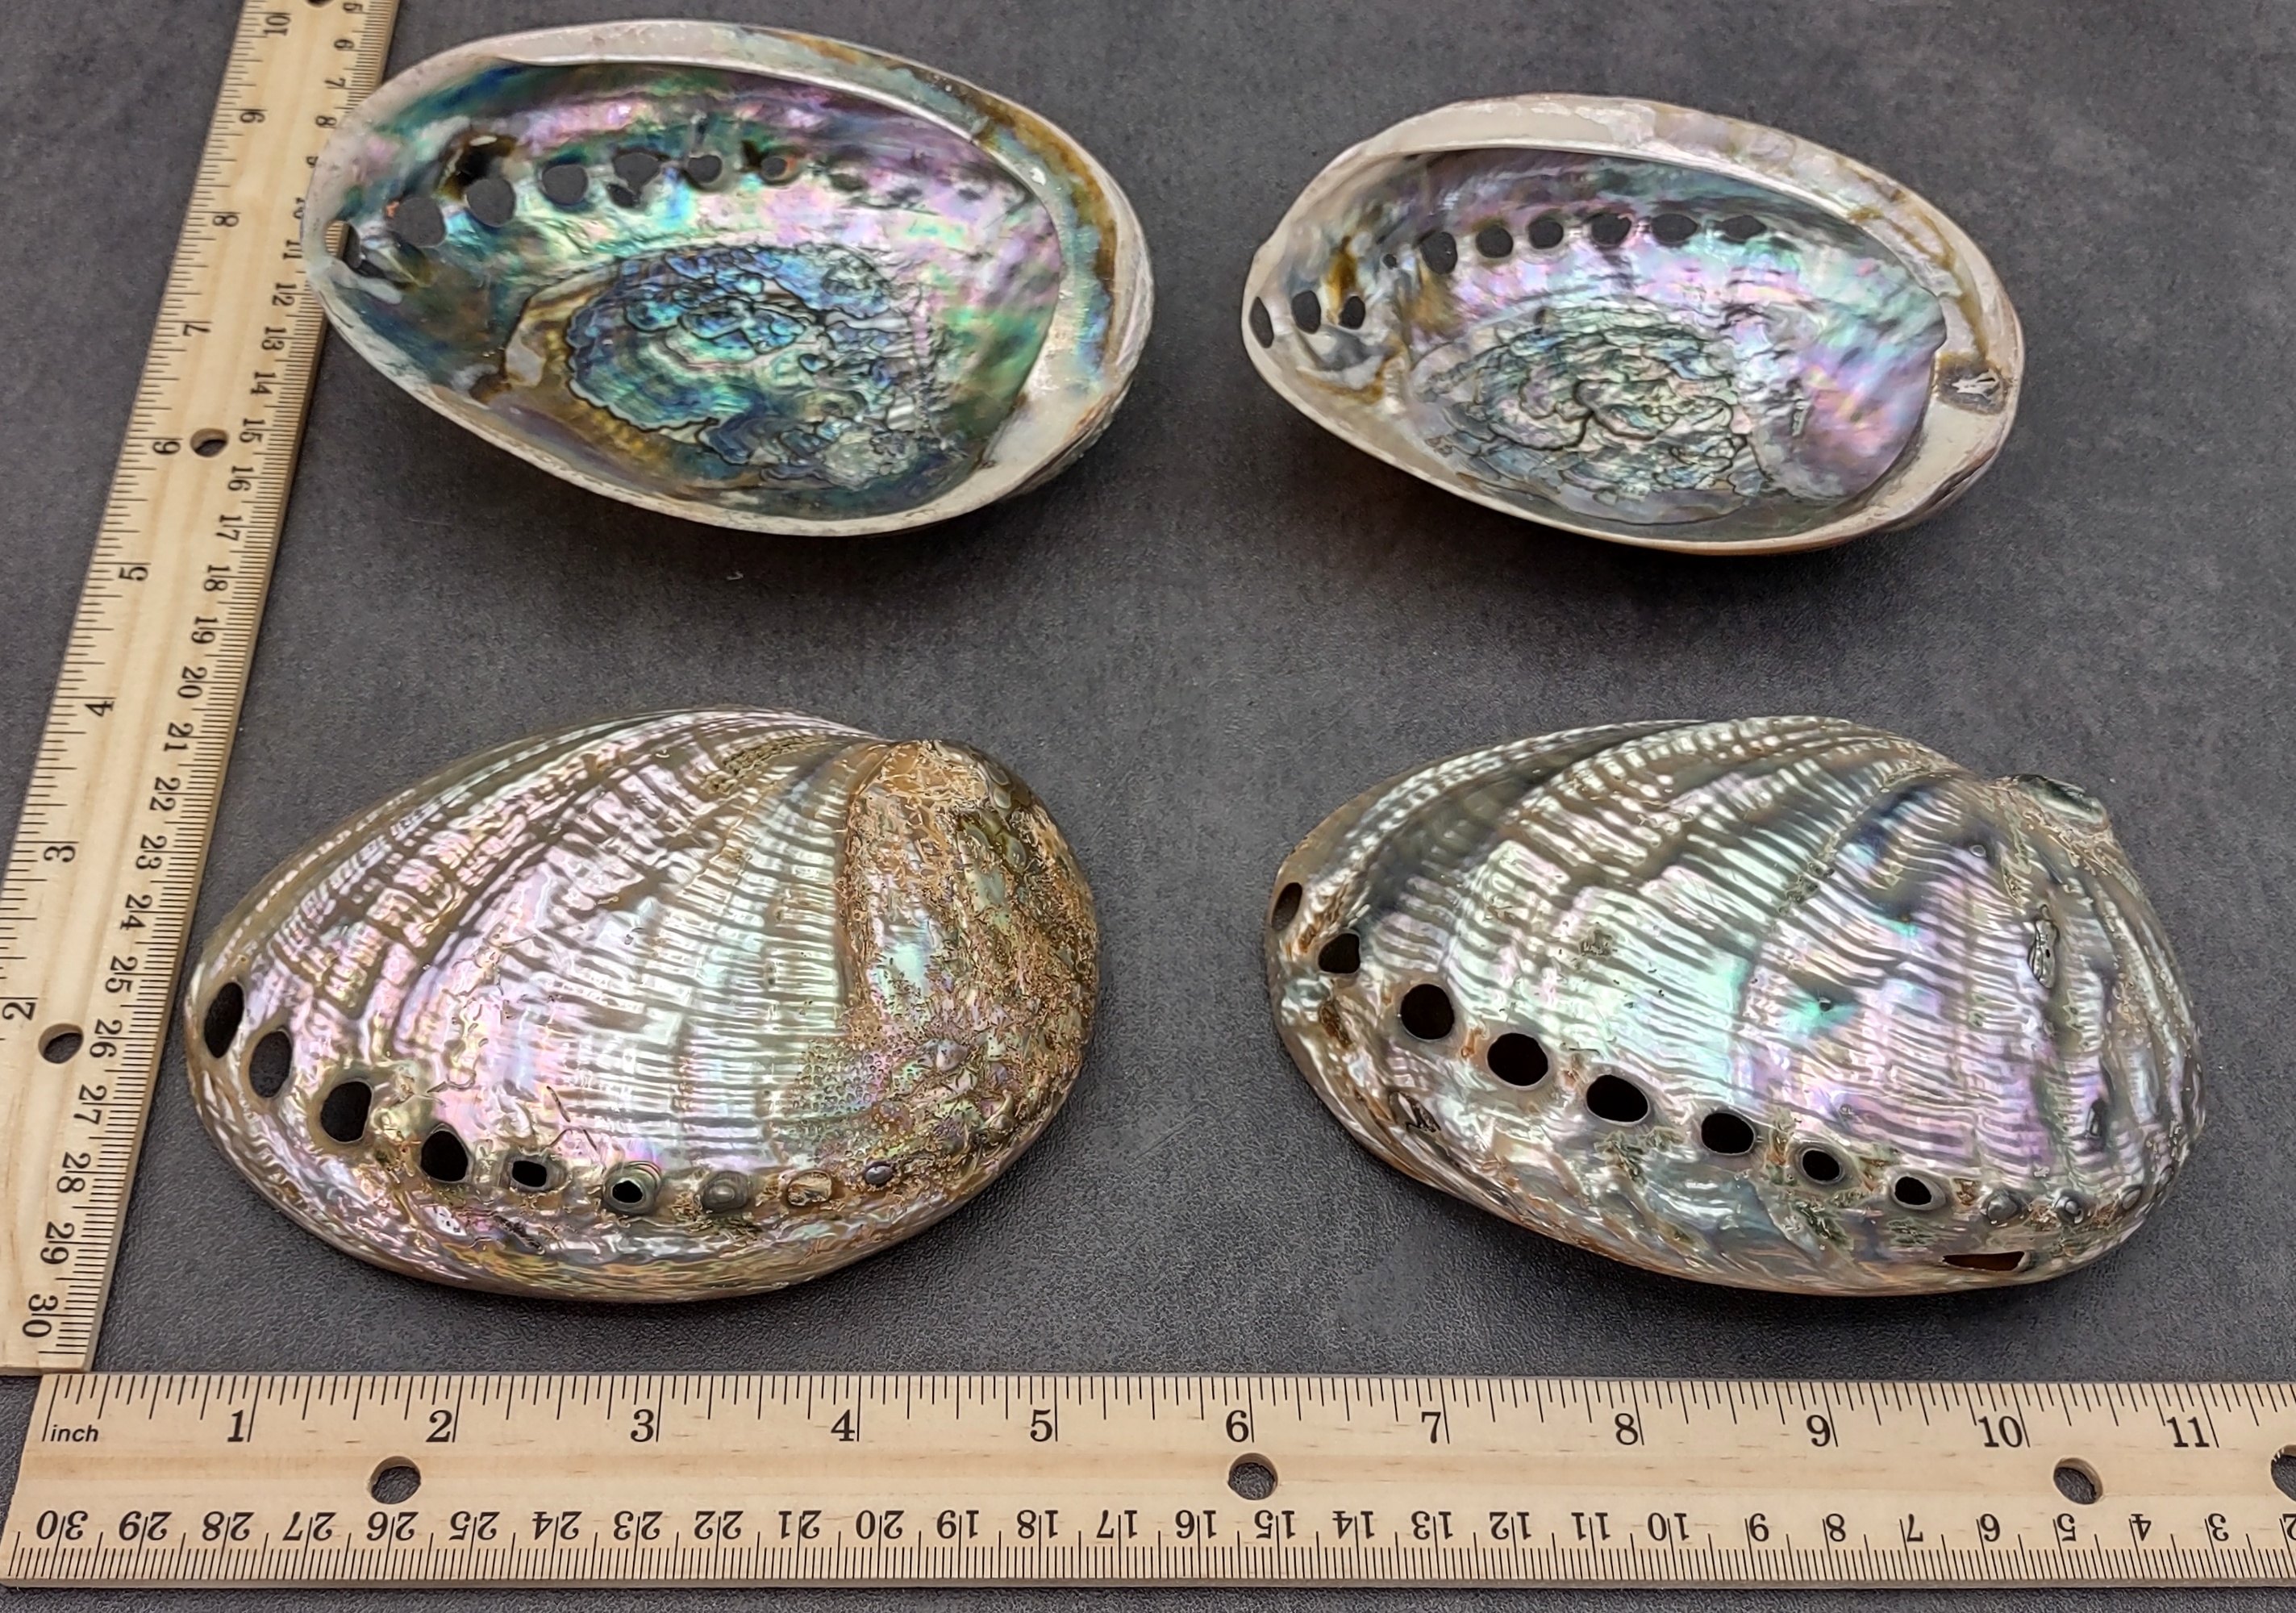 Large California Red Abalone Shell - Grade A